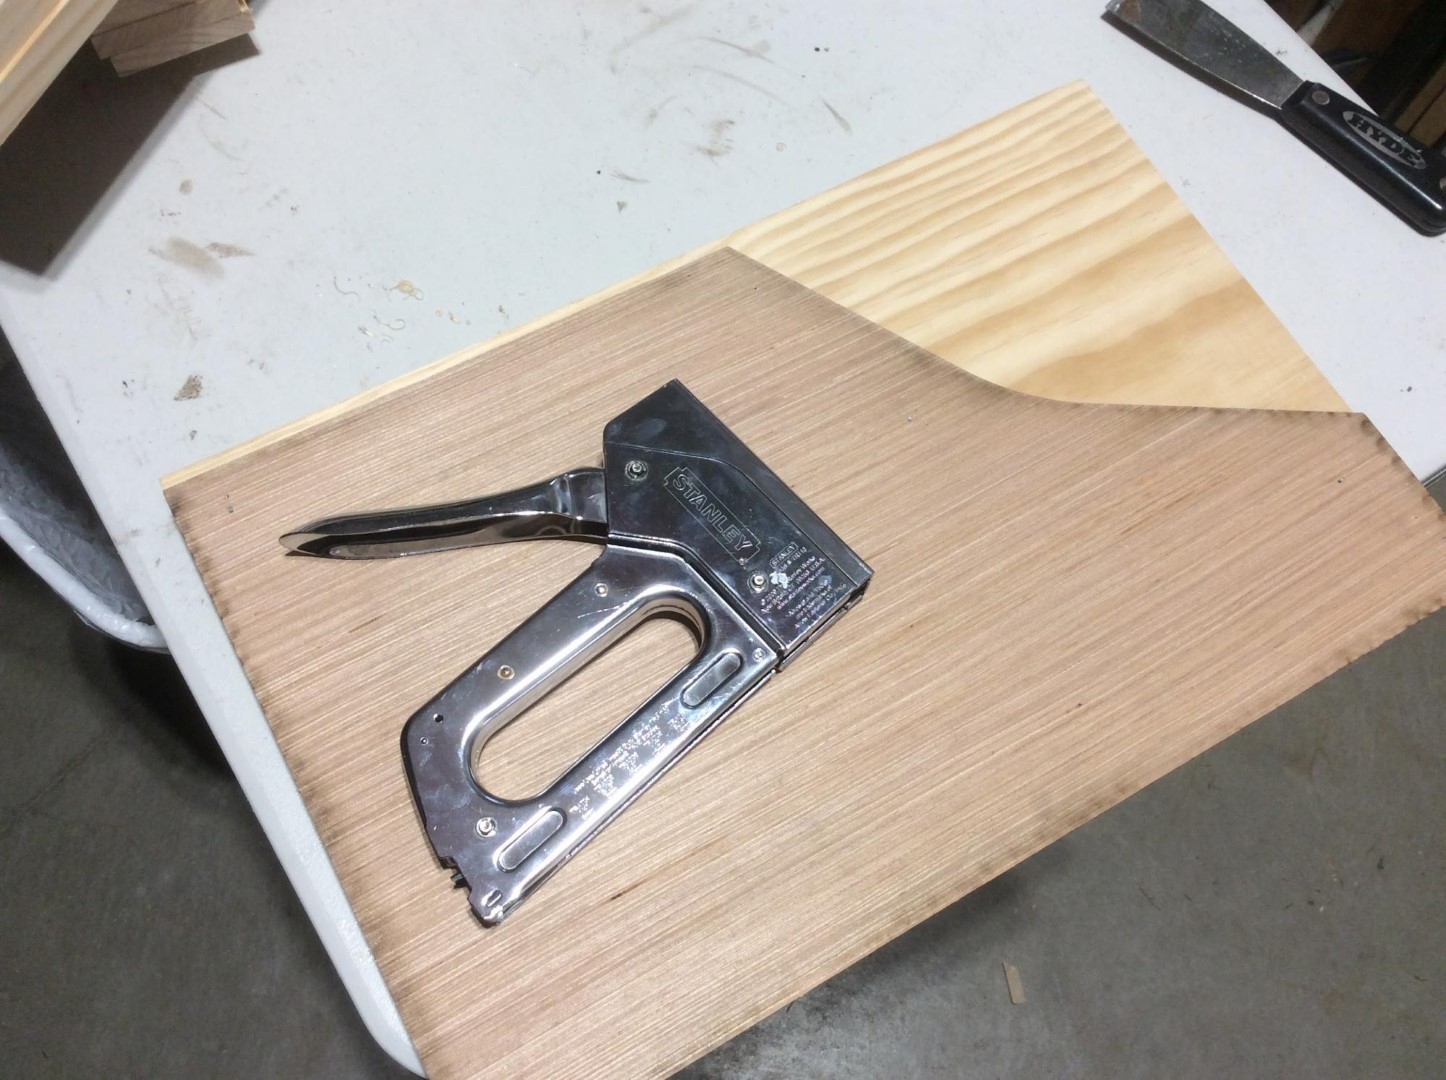 Laser cut, quarter inch luan plywood makes a great router template.  